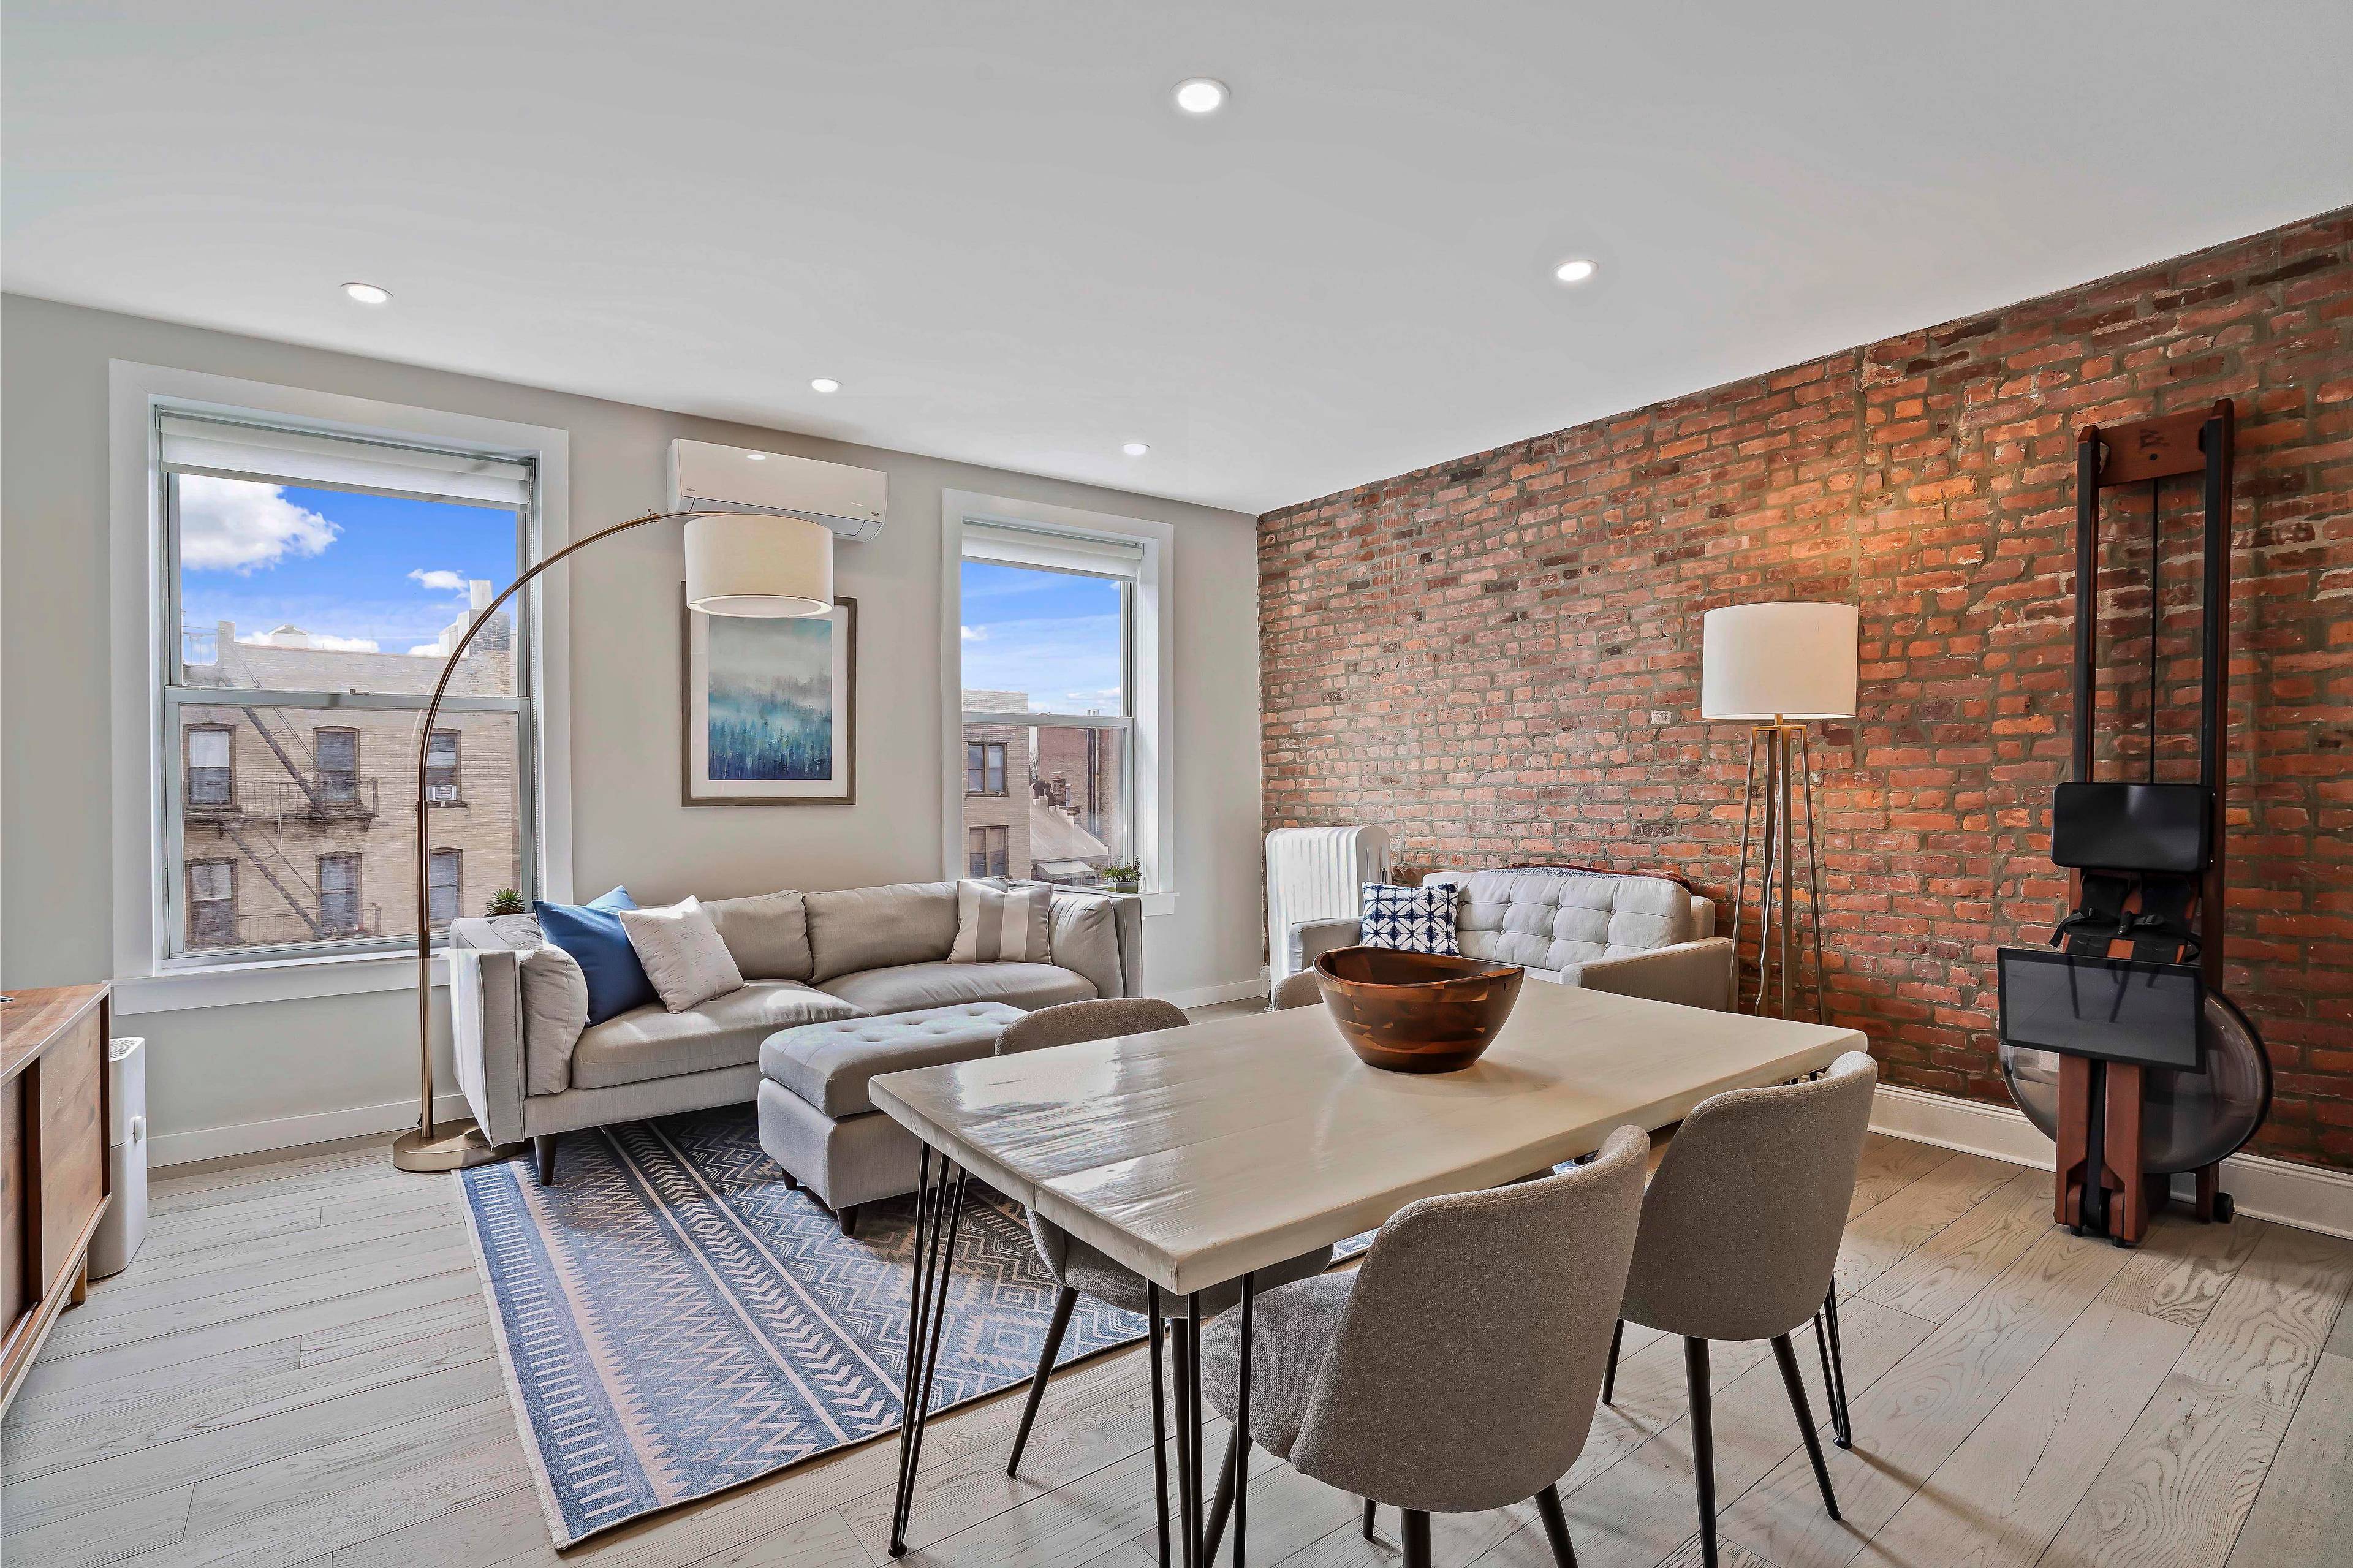 This beautiful 2 bedroom condo sits on the top floor of a former Remsen Street Mansion on a tree lined street in the heart of Brooklyn Heights.